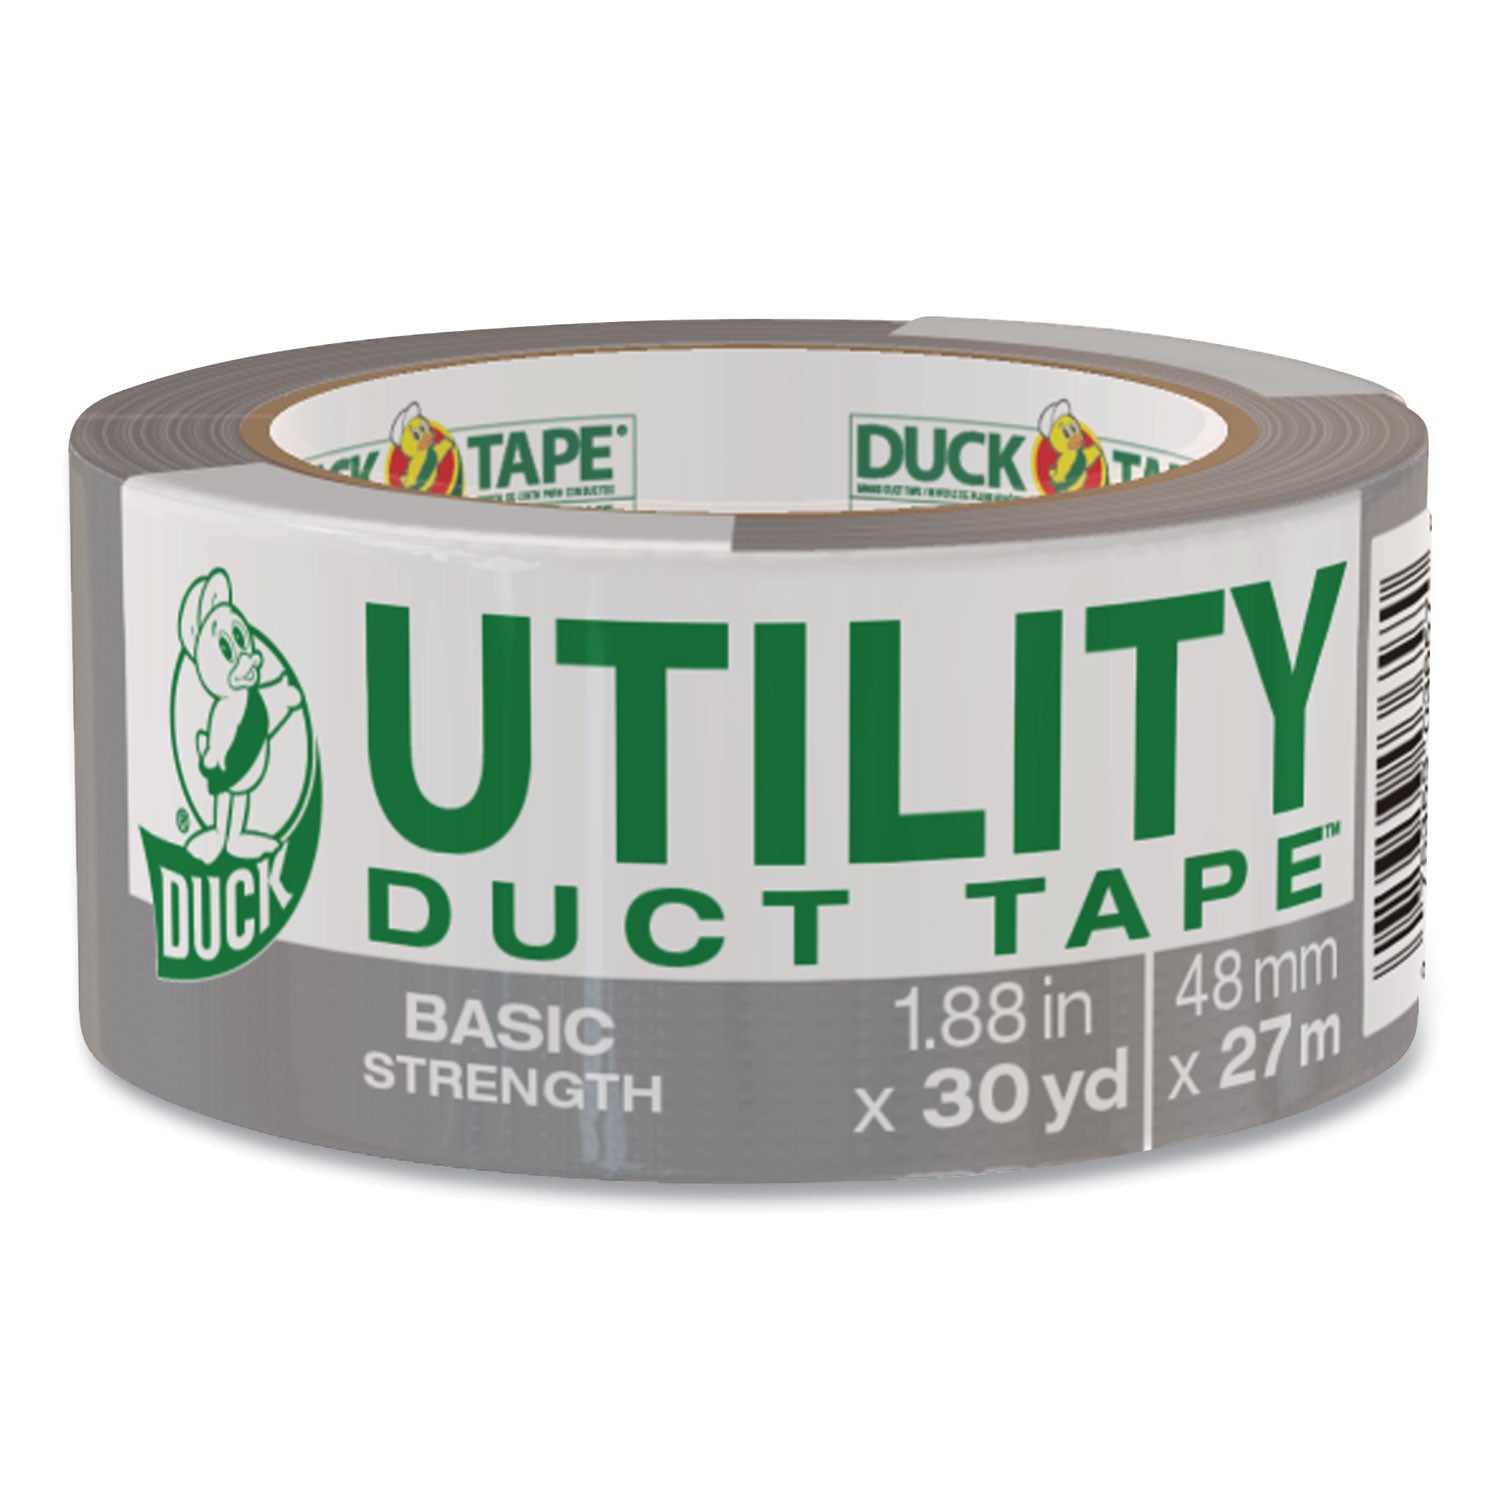 Basic Strength Duct Tape, 3" Core, 1.88" x 30 yds, Silver - 